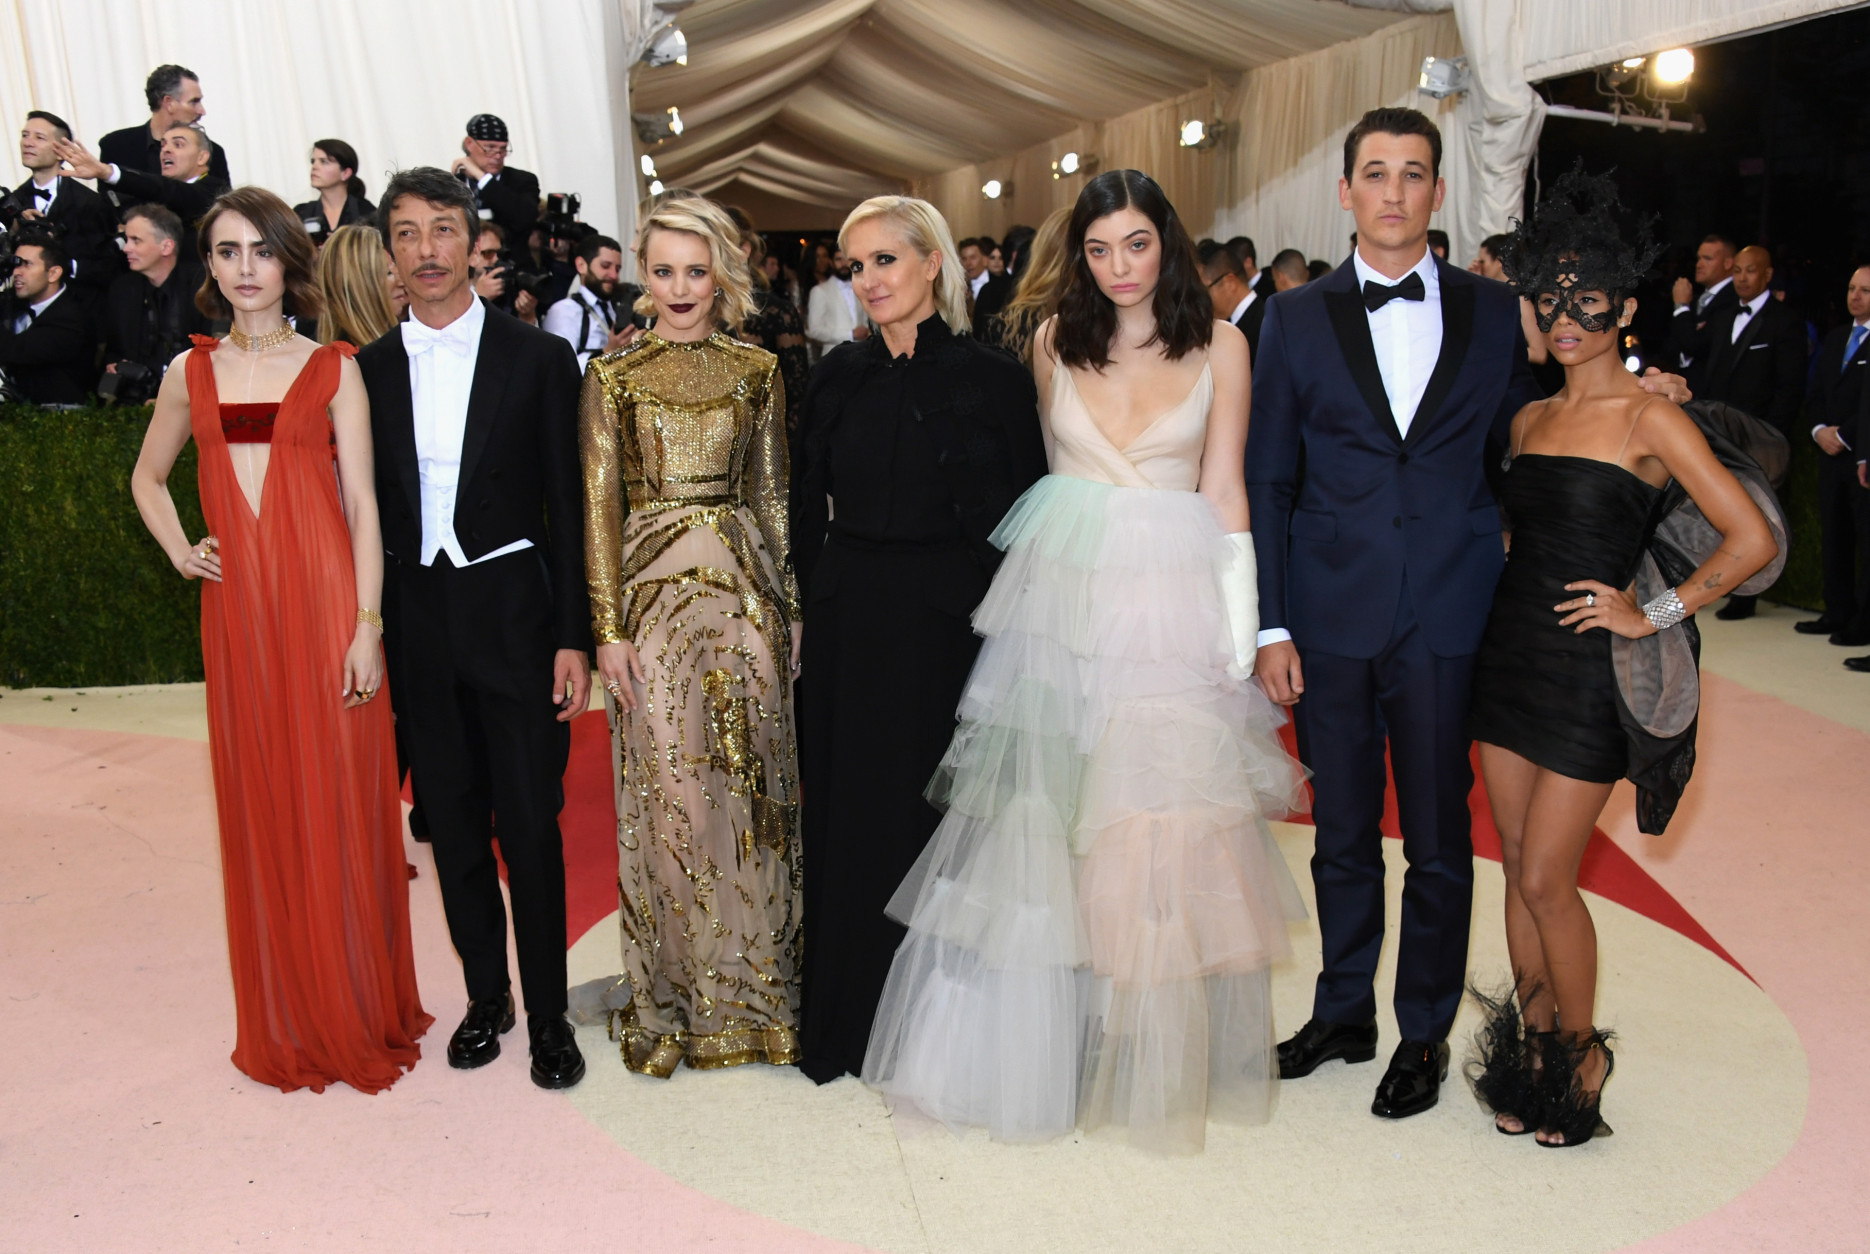 (L-R) Lily Collins, Pierpaolo Piccioli, Rachel McAdams, Maria Grazia Chiuri, Lorde, Miles Teller, and Zoe Kravitz attend the "Manus x Machina: Fashion In An Age Of Technology" Costume Institute Gala at Metropolitan Museum of Art on May 2, 2016 in New York City.  (Photo by Larry Busacca/Getty Images)